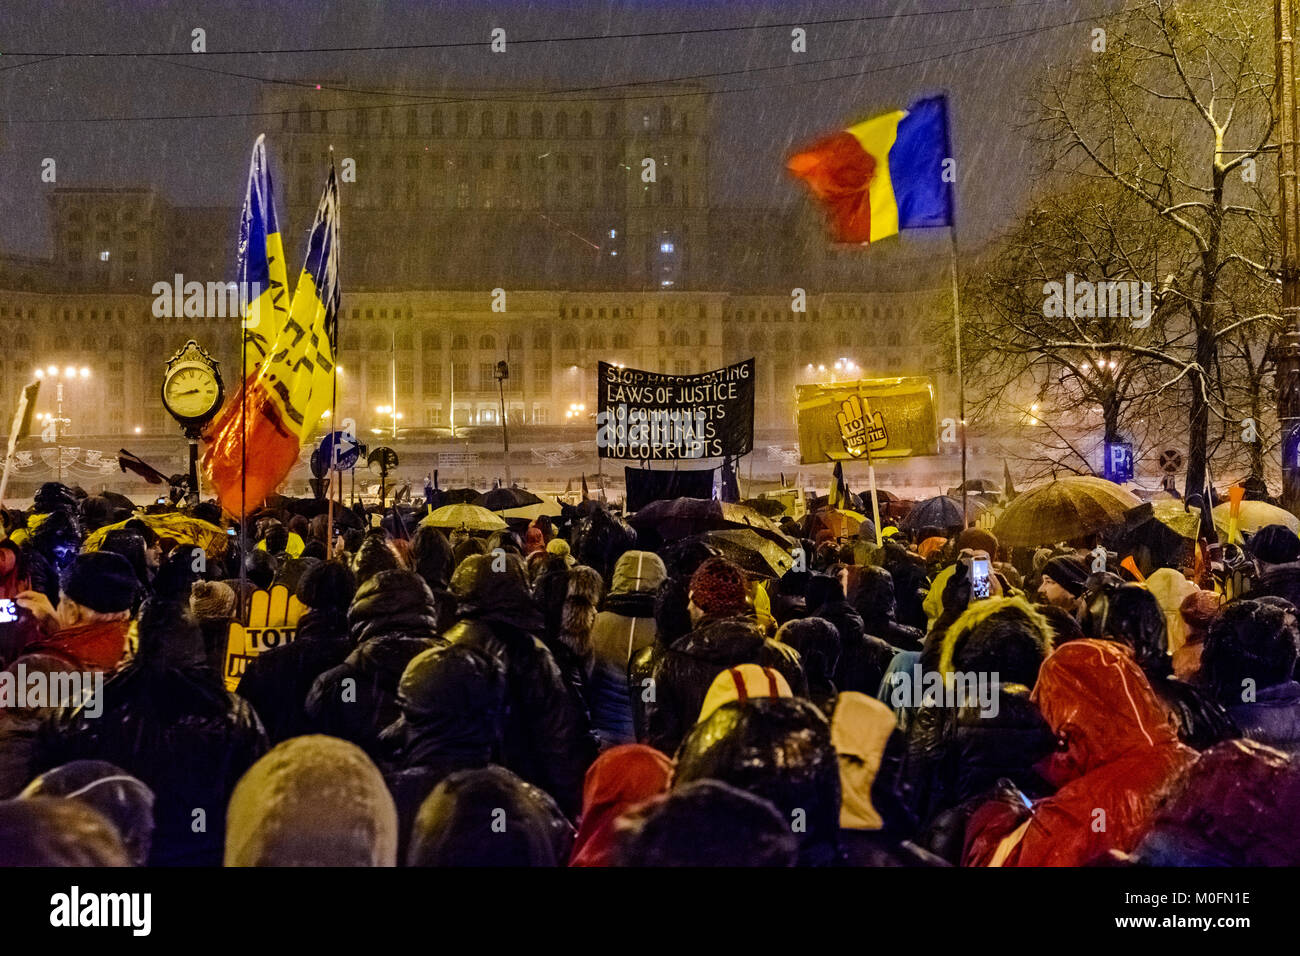 Demonstrators during an anti-corruption protest in front of the Romanian Parliament building in Bucharest Stock Photo